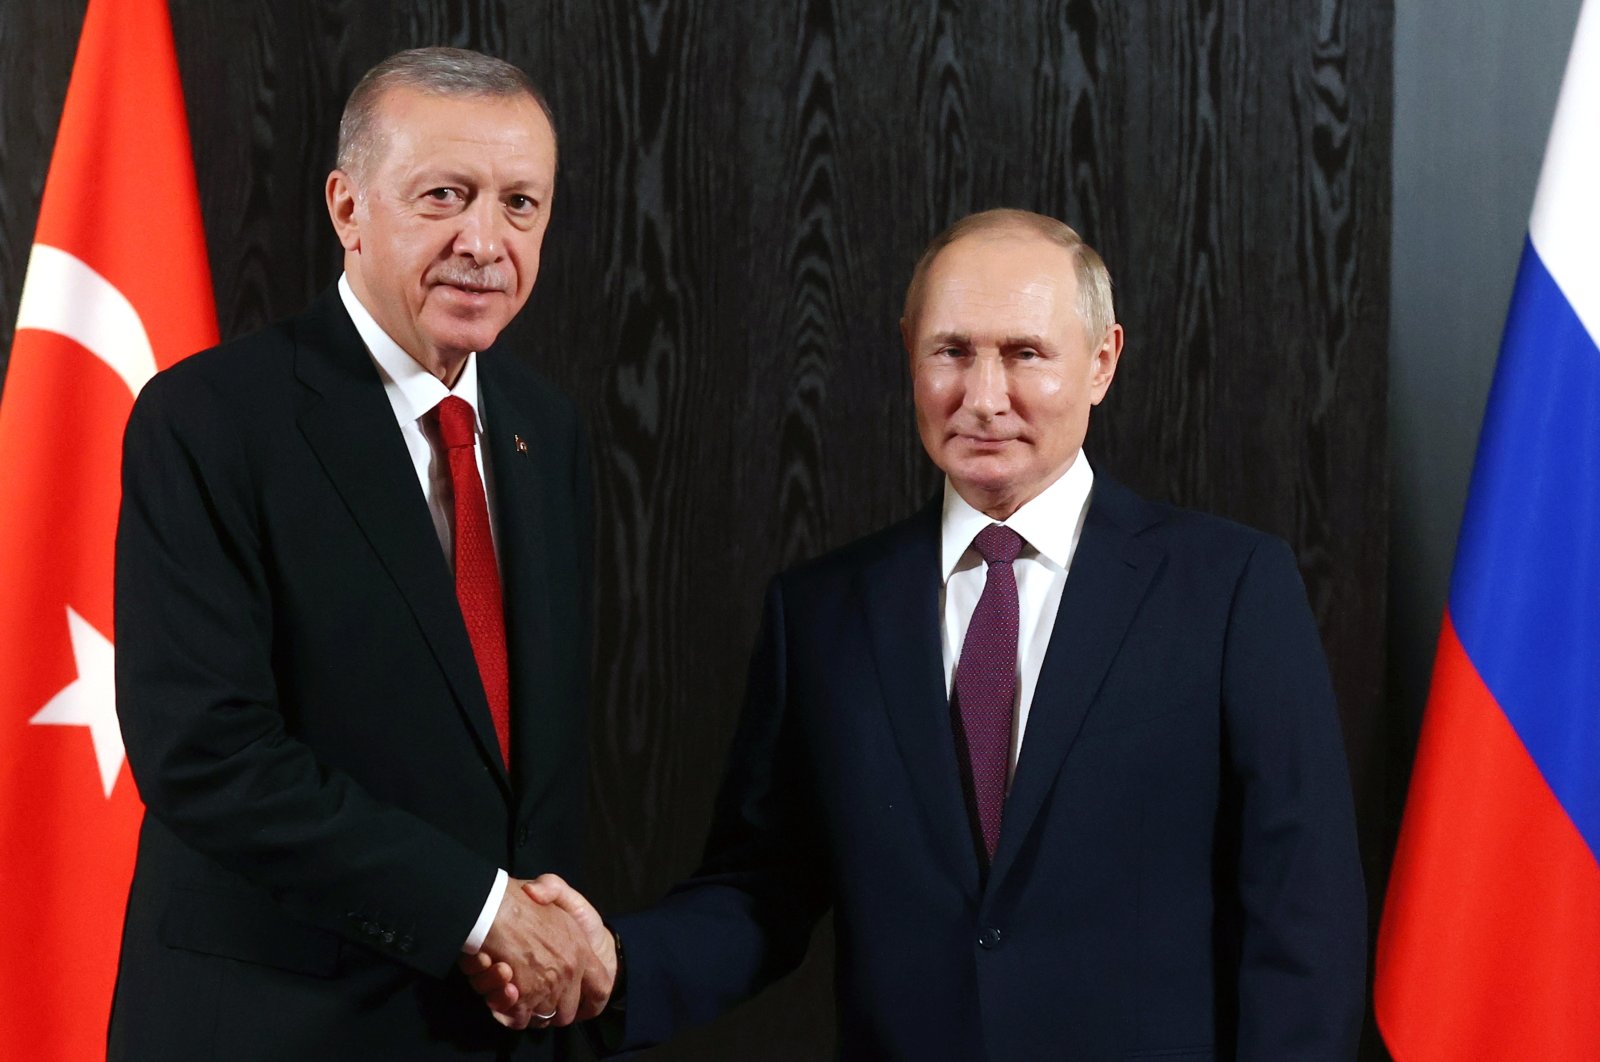 Russian President Vladimir Putin (R) and President Recep Tayyip Erdoğan pose for a photo prior to their talks on the sidelines of the Shanghai Cooperation Organisation (SCO) summit in Samarkand, Uzbekistan, Sept. 16, 2022. (AFP Photo)